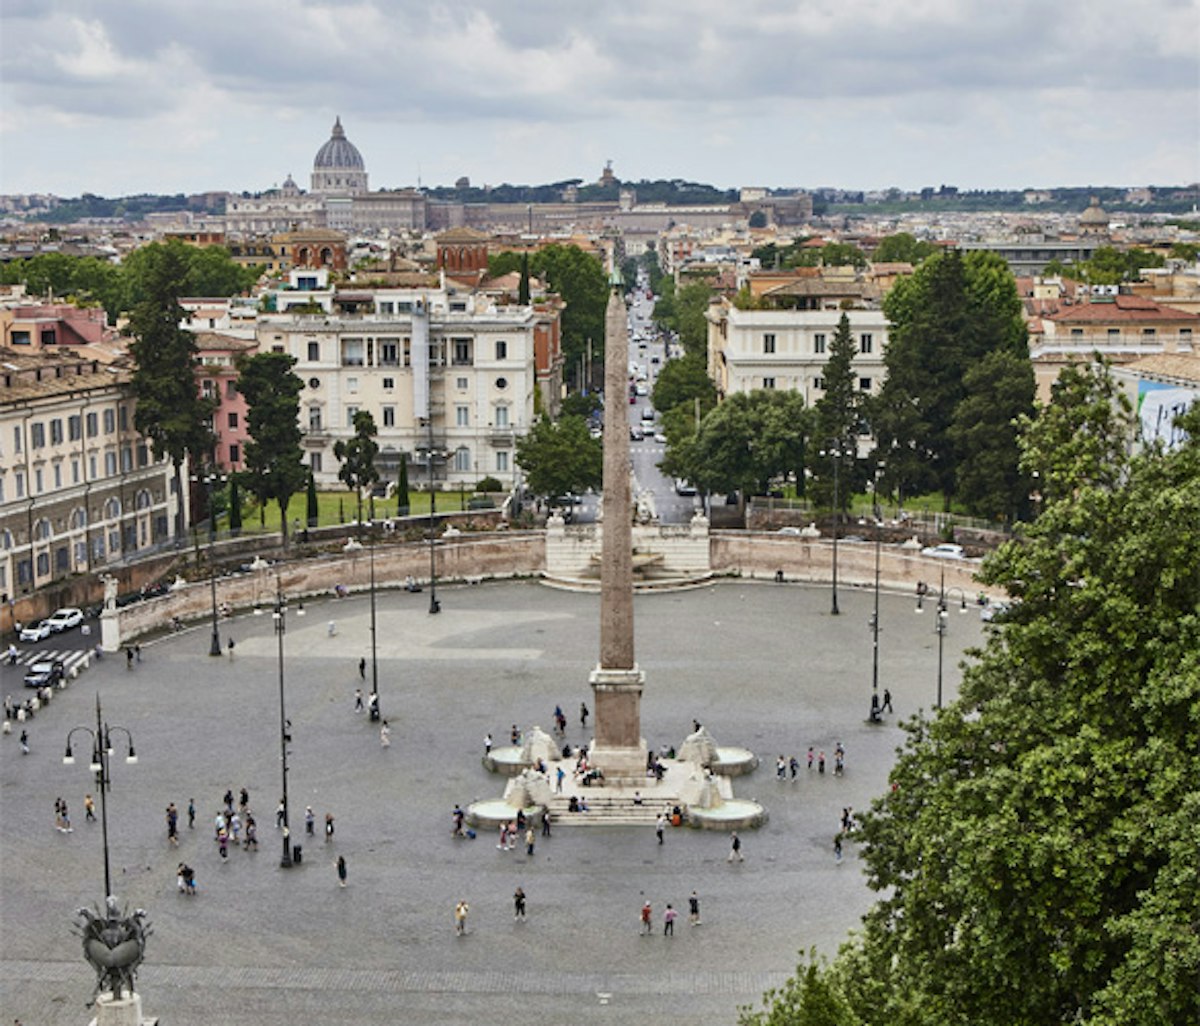 A view of a square in rome, italy.